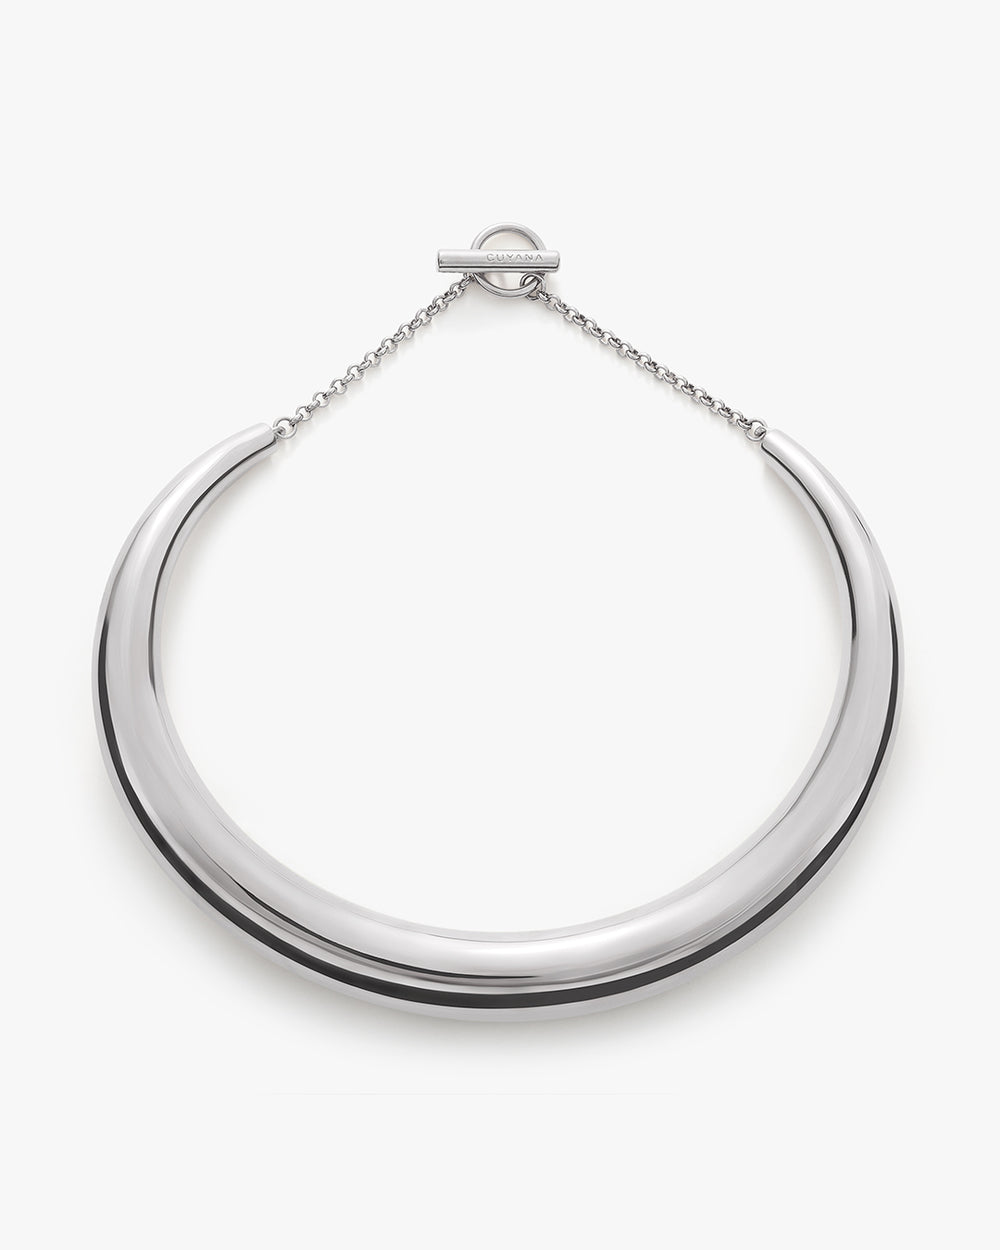 Metal necklace with a large hoop and a chain clasp.